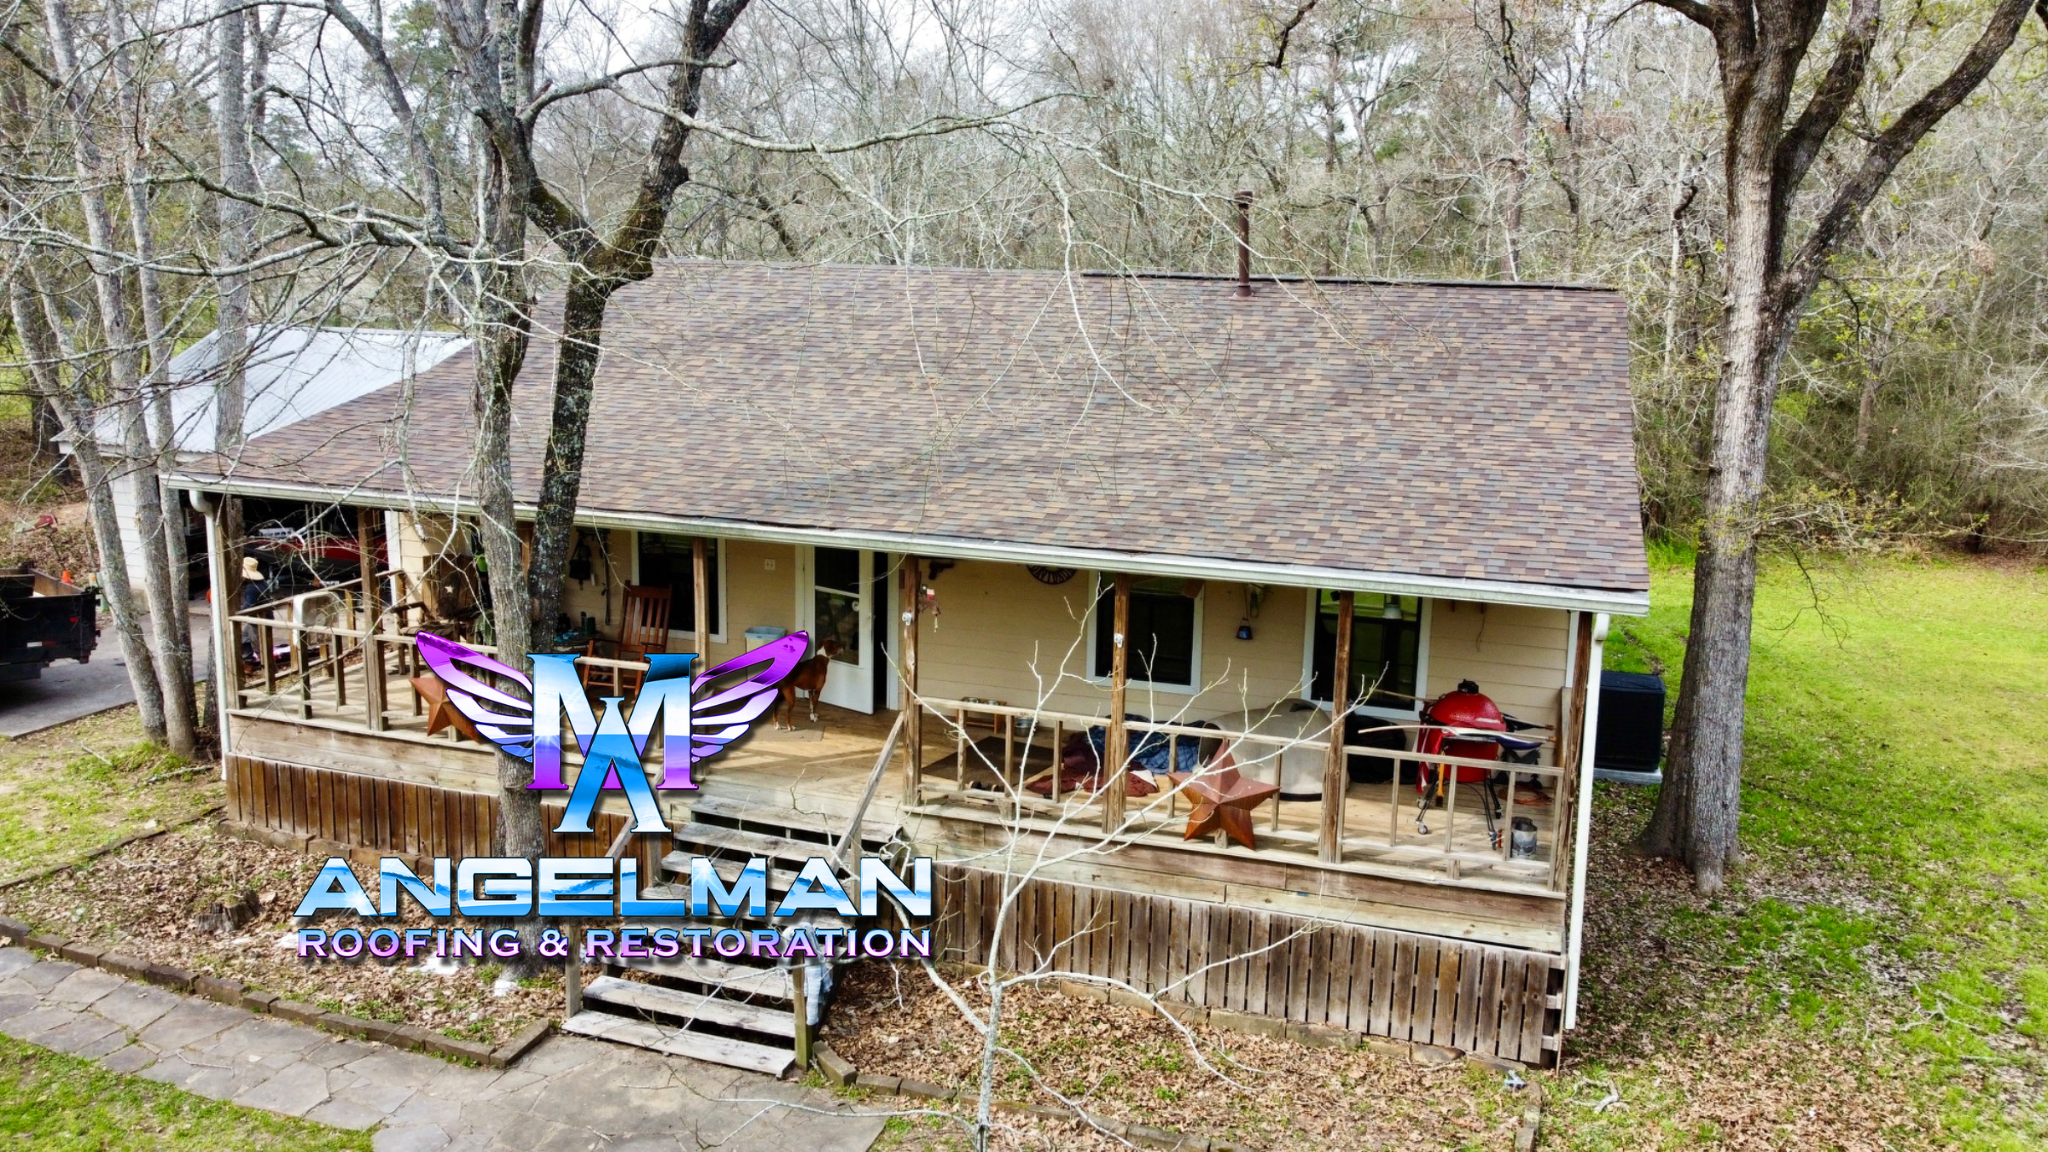 Angelman roofing and restoration